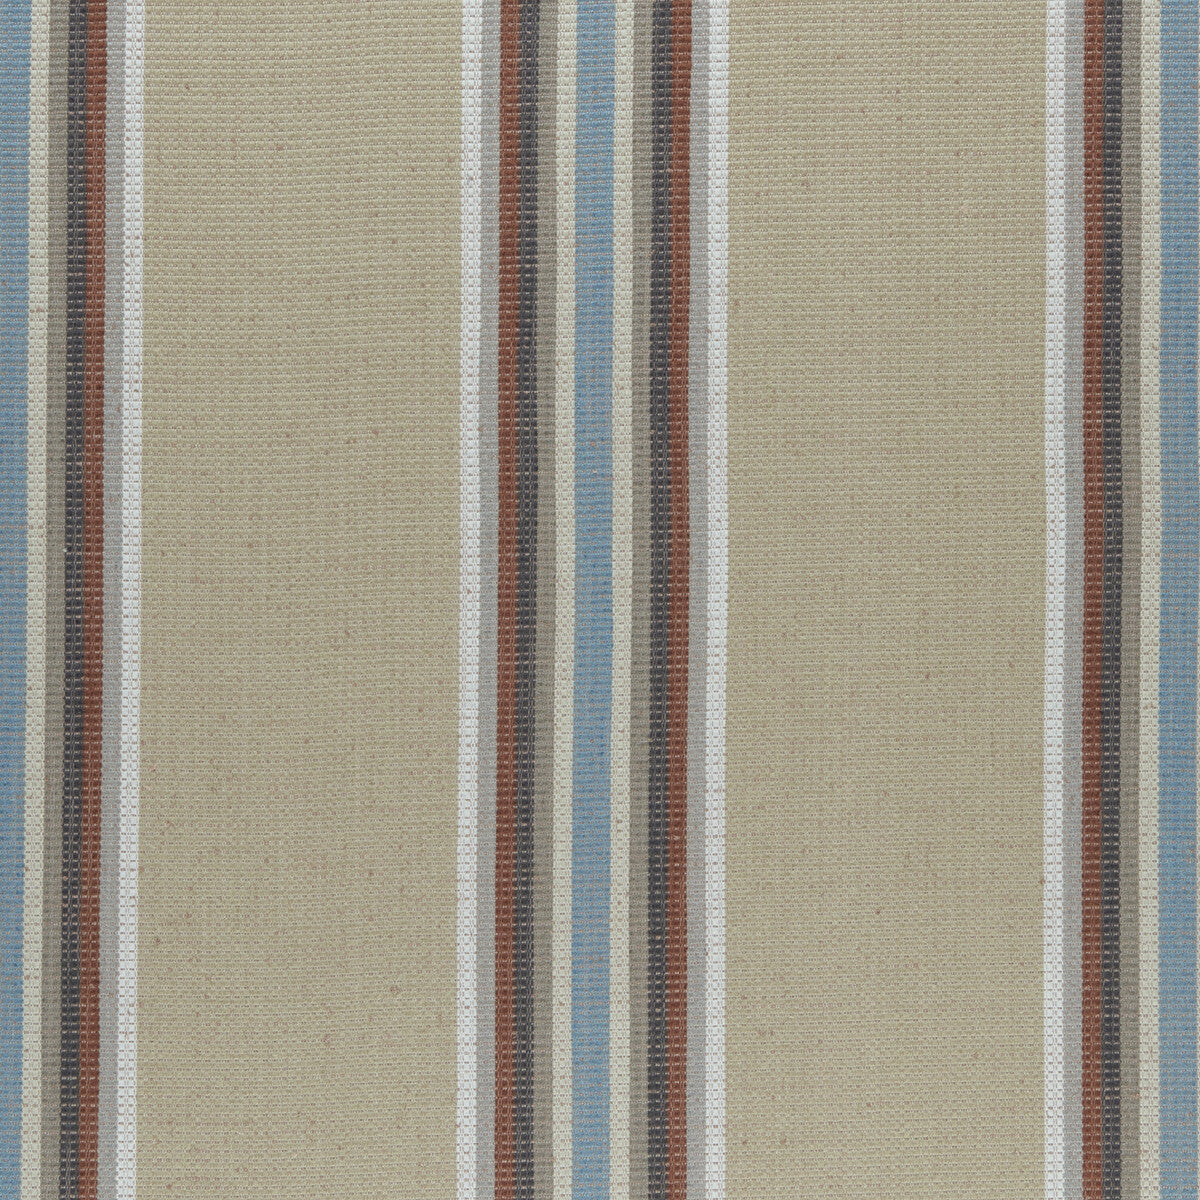 Imani fabric in cinnabar/aqua color - pattern F0955/02.CAC.0 - by Clarke And Clarke in the Clarke &amp; Clarke Amara collection